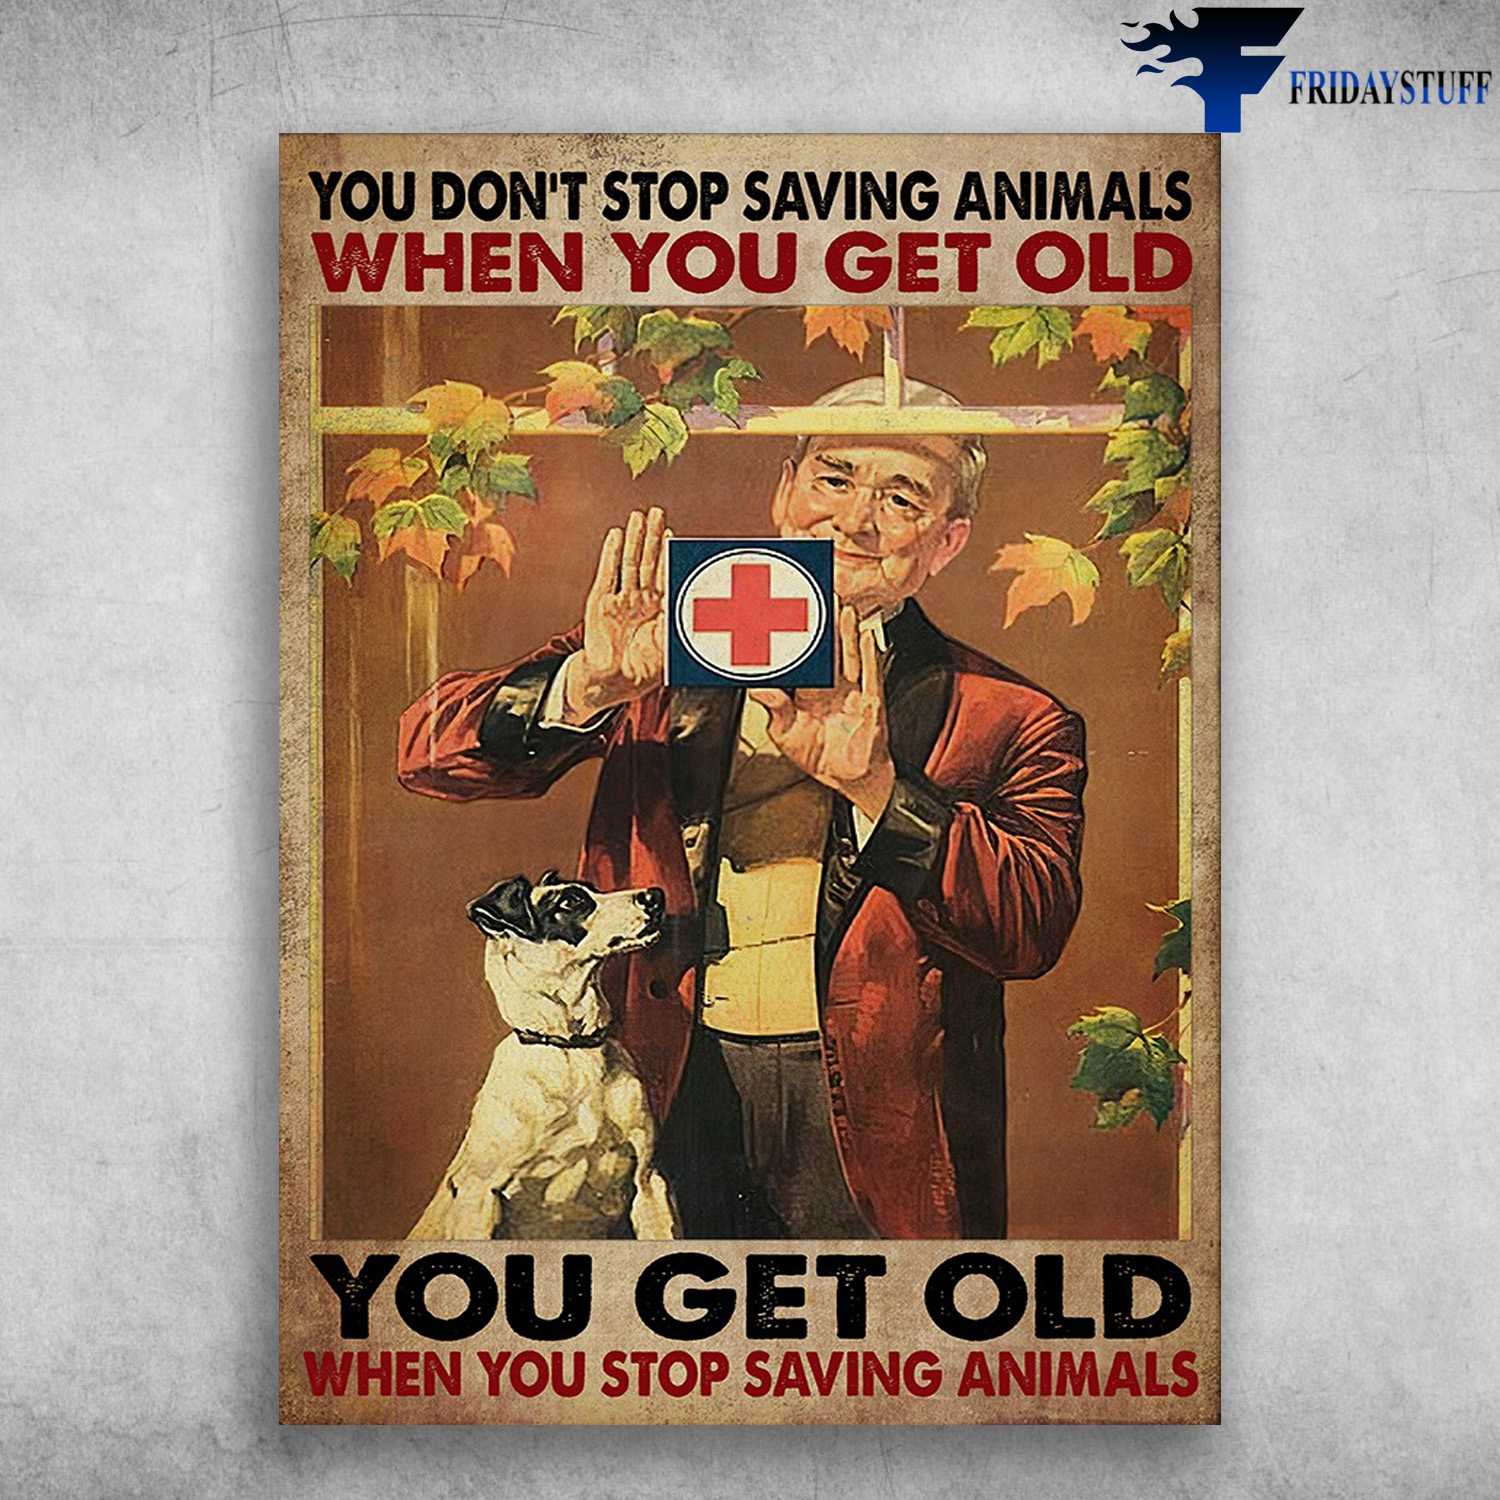 Old Veterinarian, Dog Lover - You Don't Stop Saving Amimals When You Get Old, You Get Old When You Stop Saving Animals